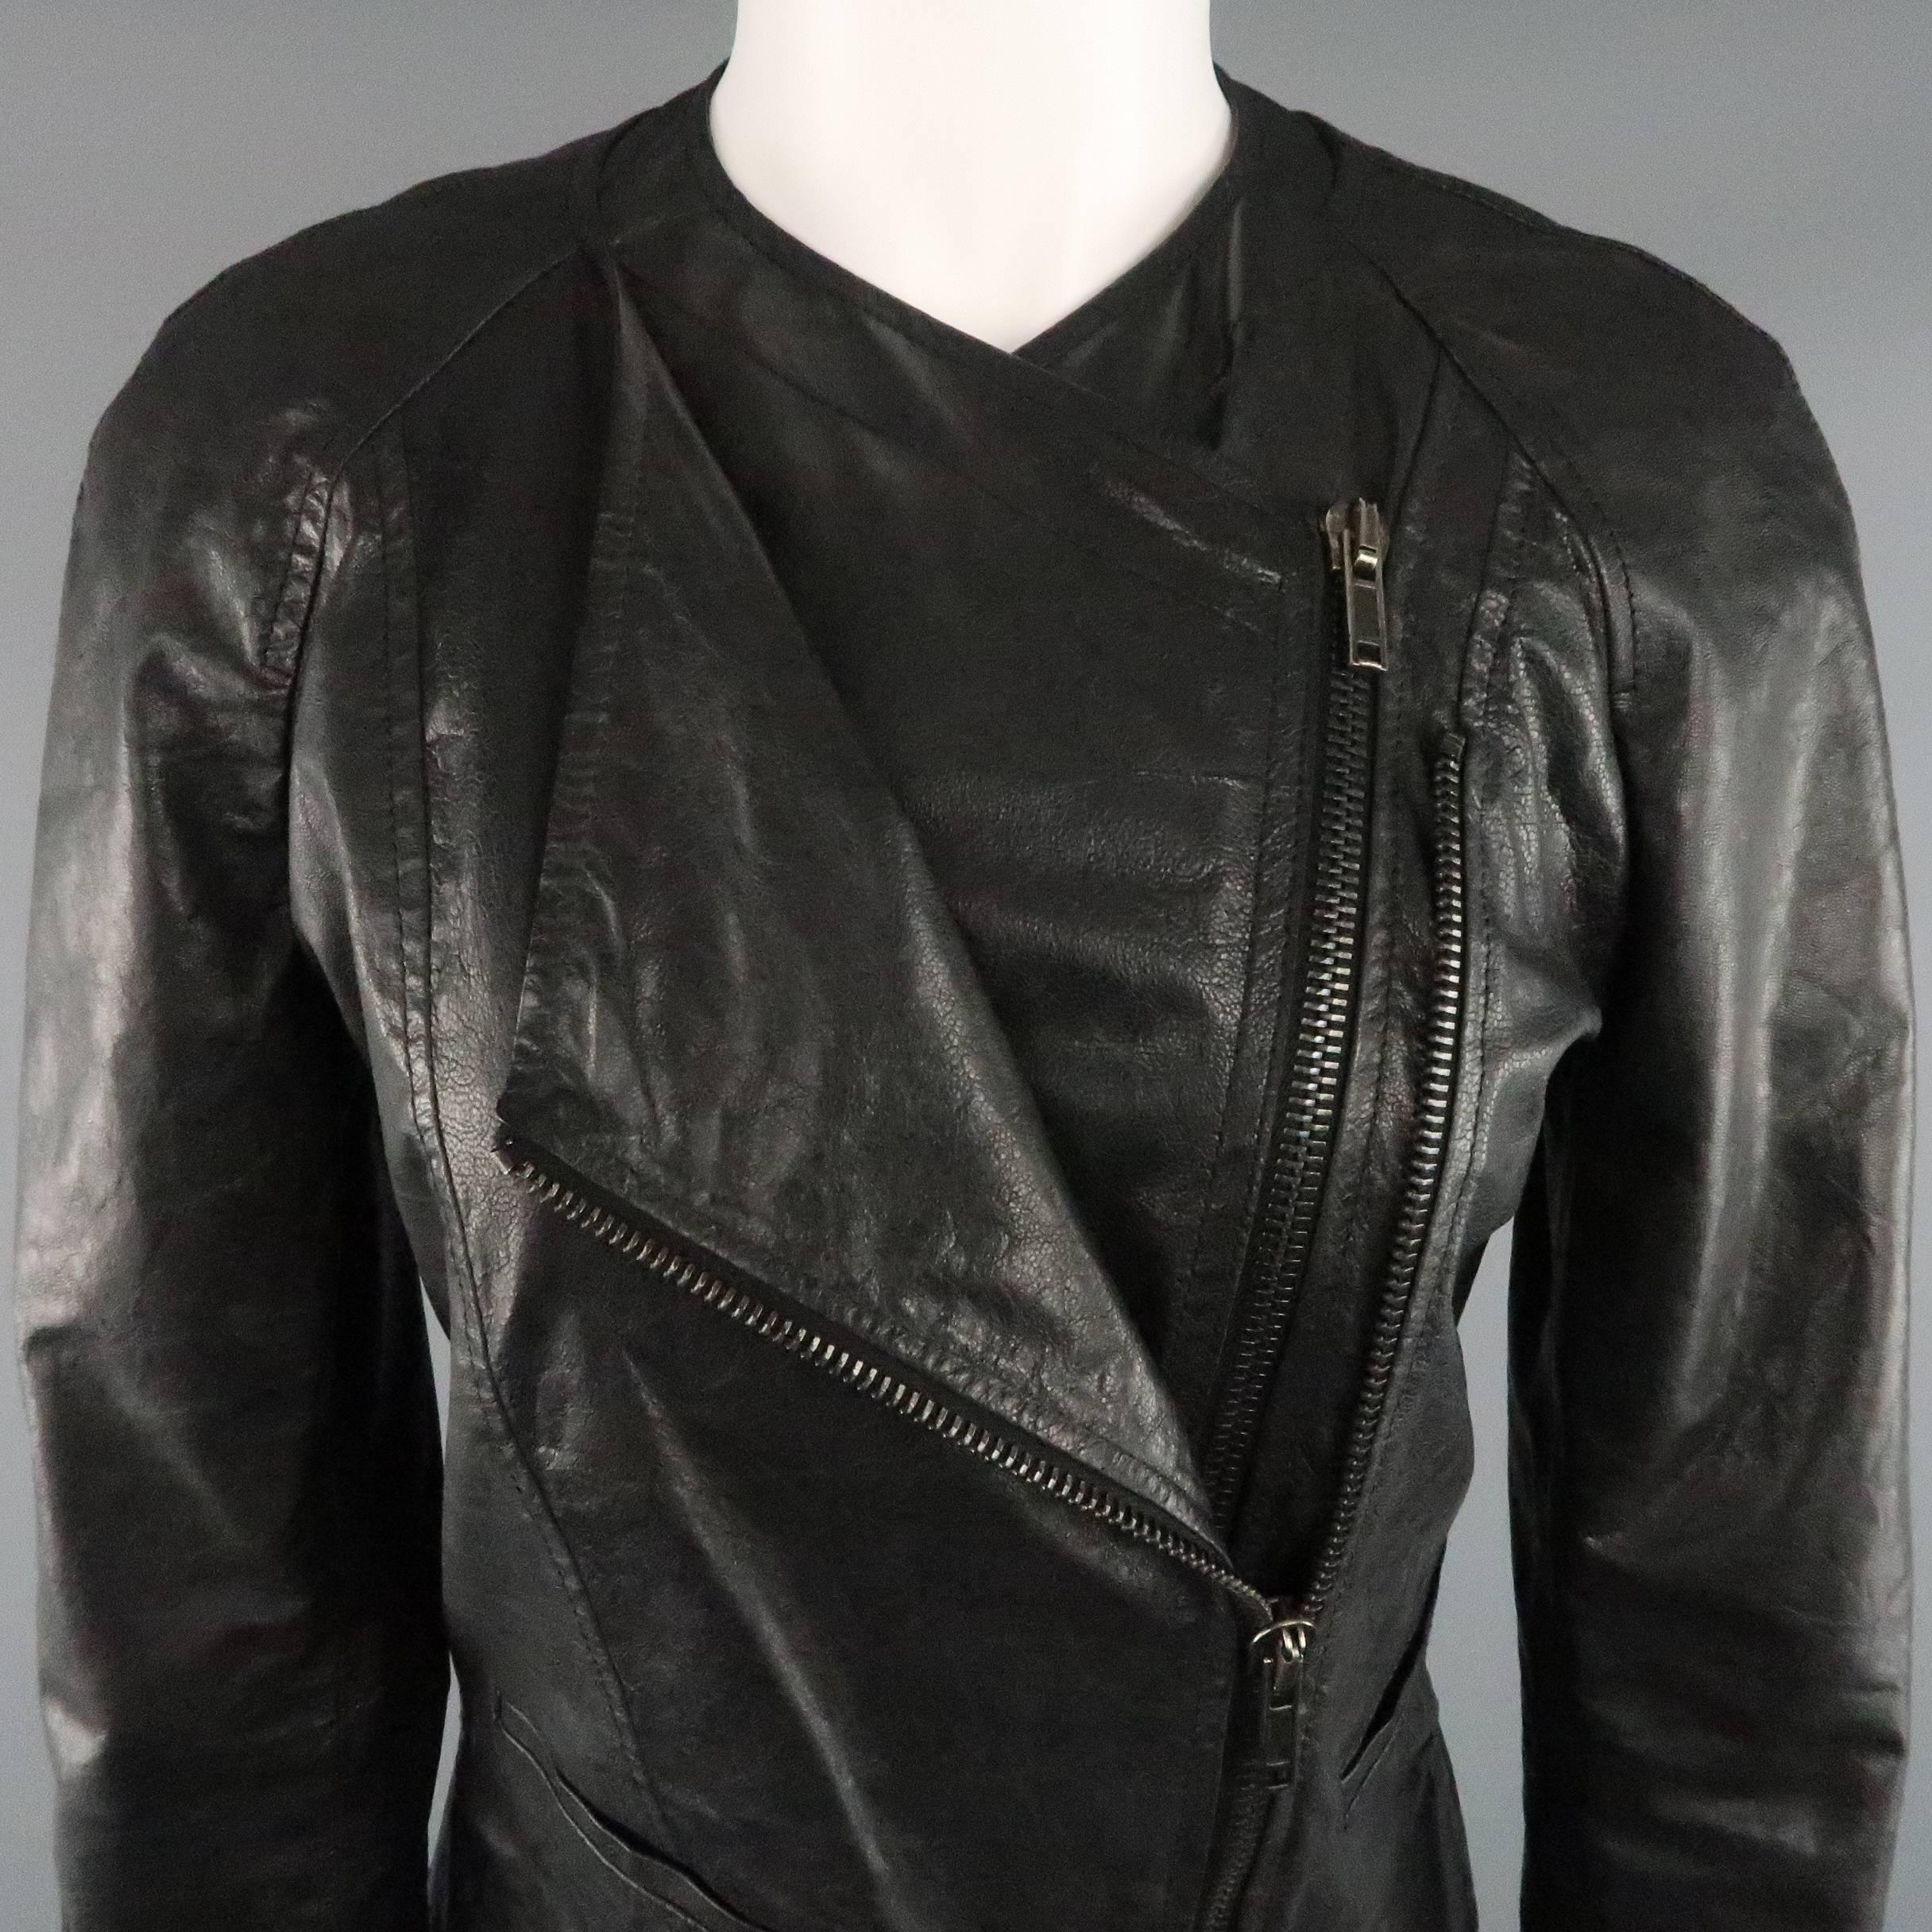 HAIDER ACKERMANN biker jacket comes in a shiny textured leather and features a collarless neckline, raglan sleeves, slit back, and asymmetrical layered, double zip closure. Made in Italy.
 
Good Pre-Owned Condition.
Marked: IT 38
 
Measurements:
